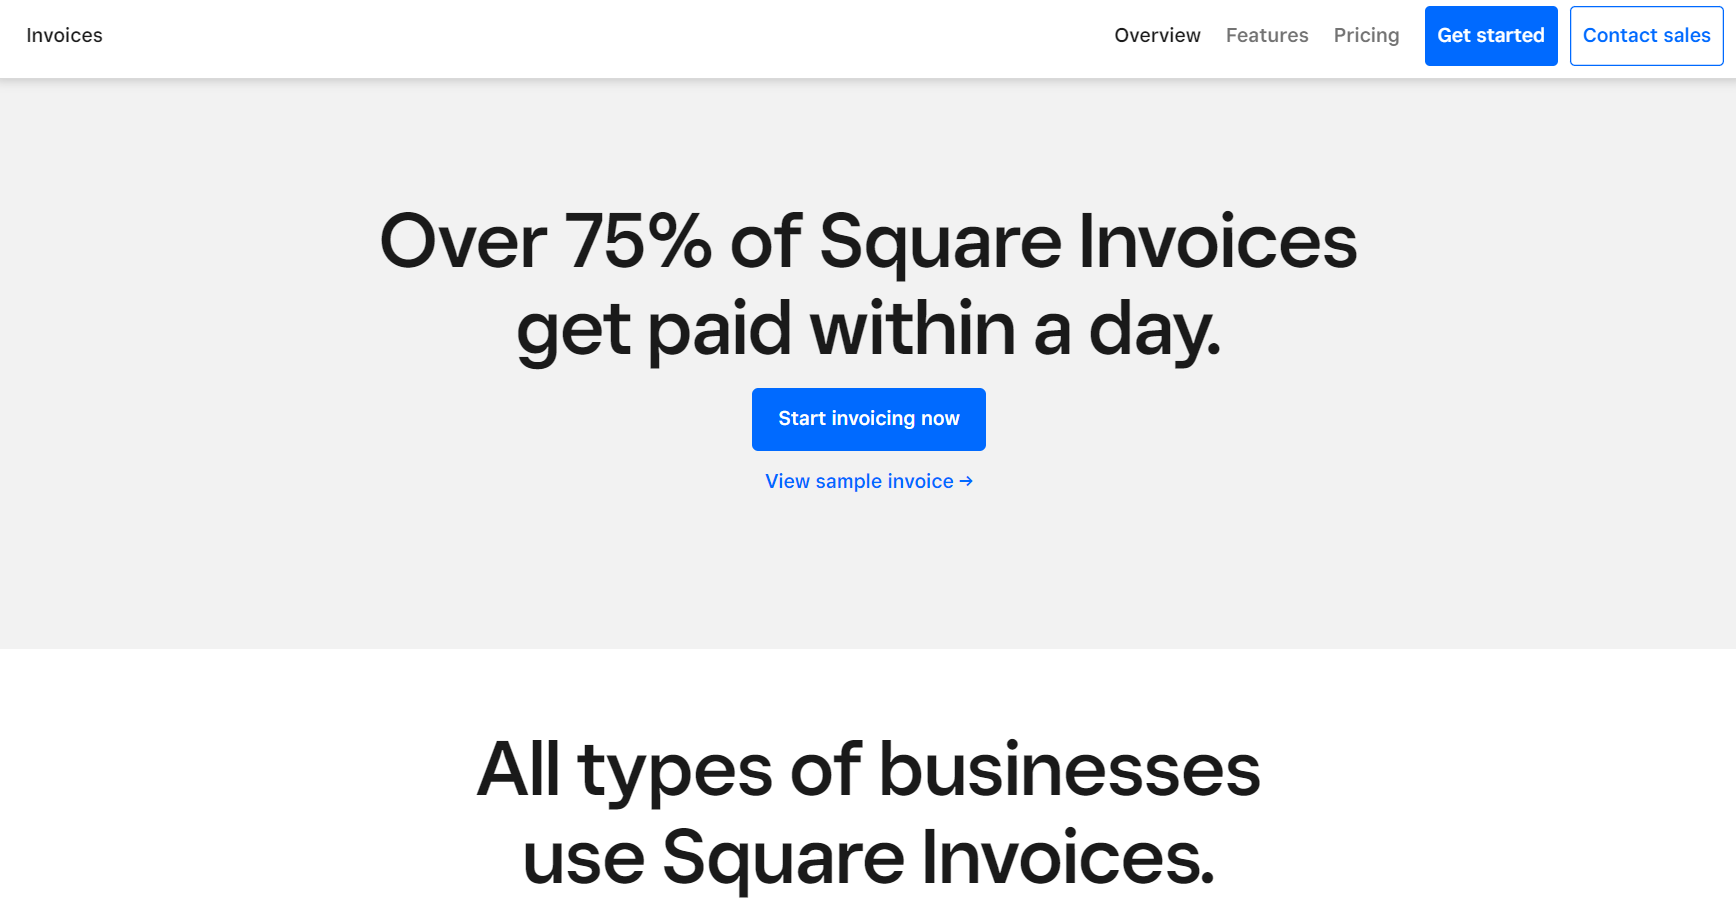 Square Invoices Review: How to Apply for Square Invoices